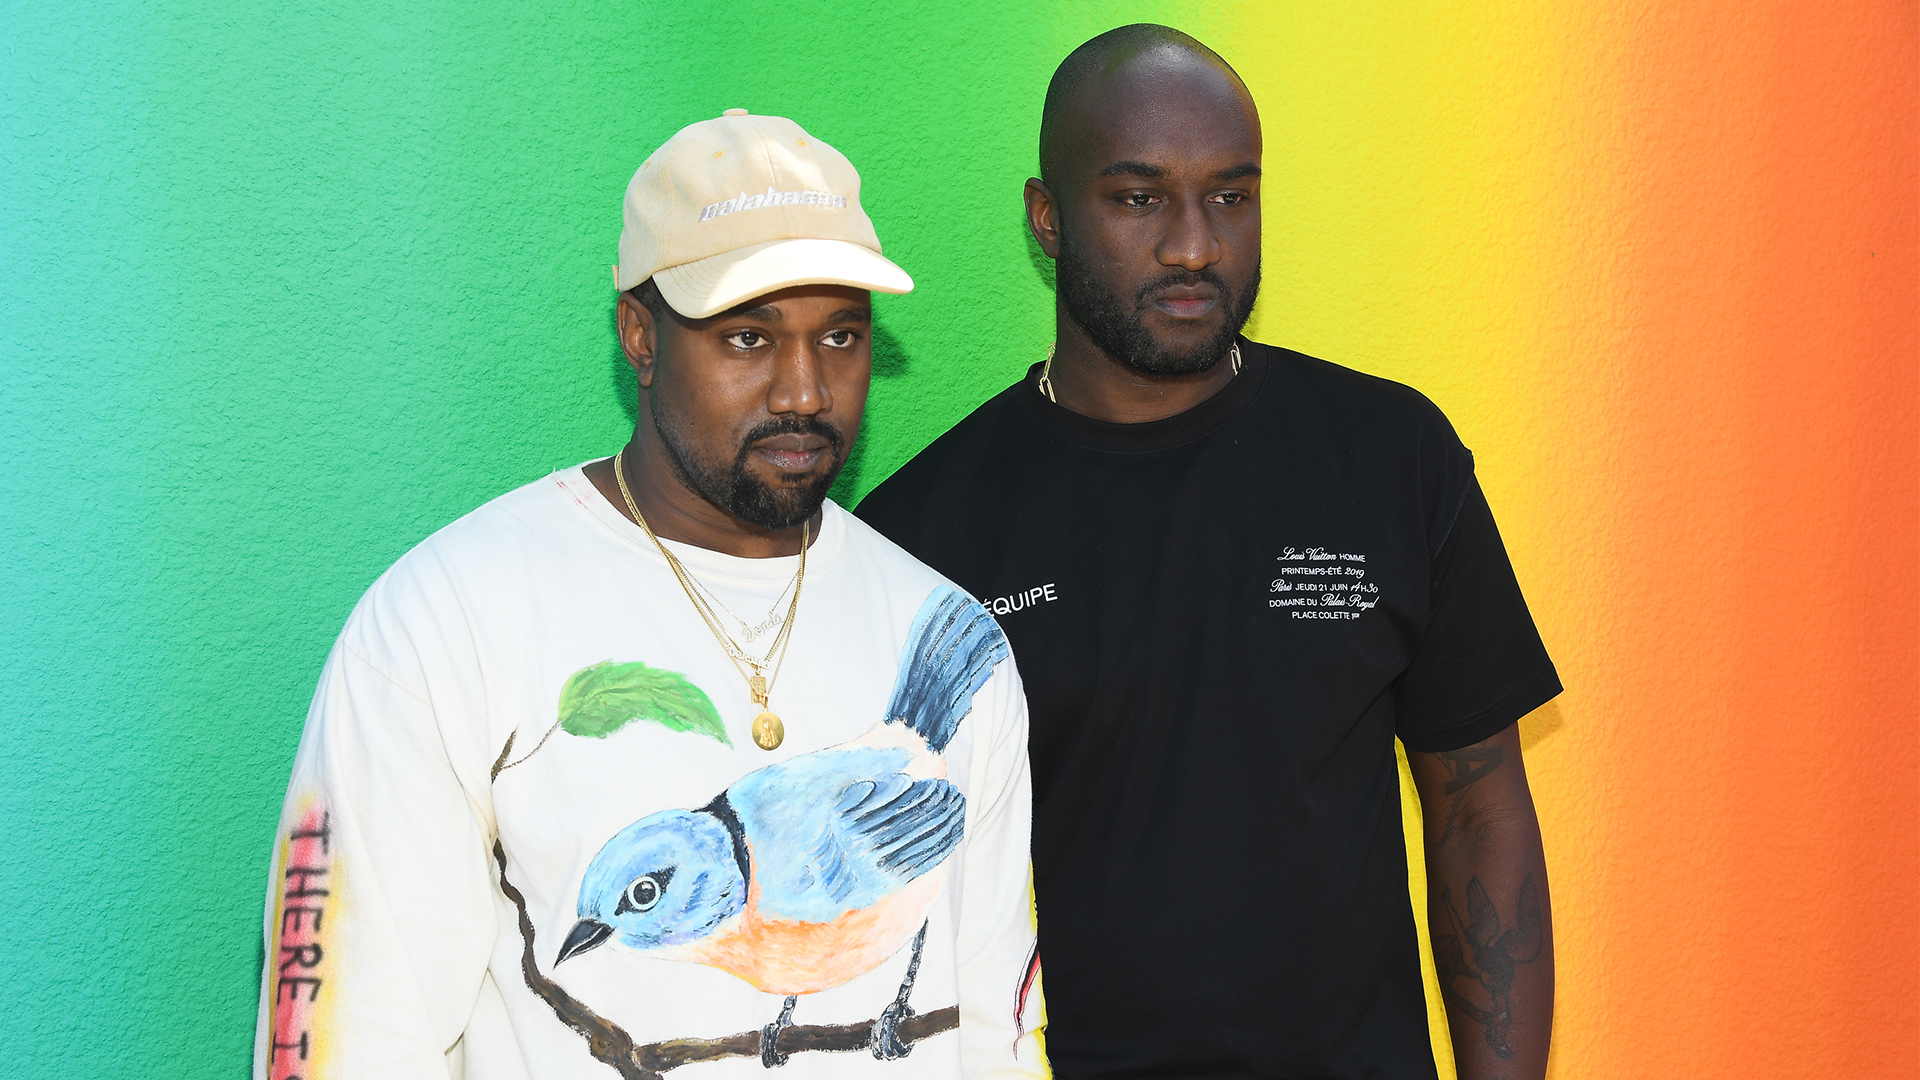 Will Kanye West Take Over Virgil Abloh's Role At Louis Vuitton?